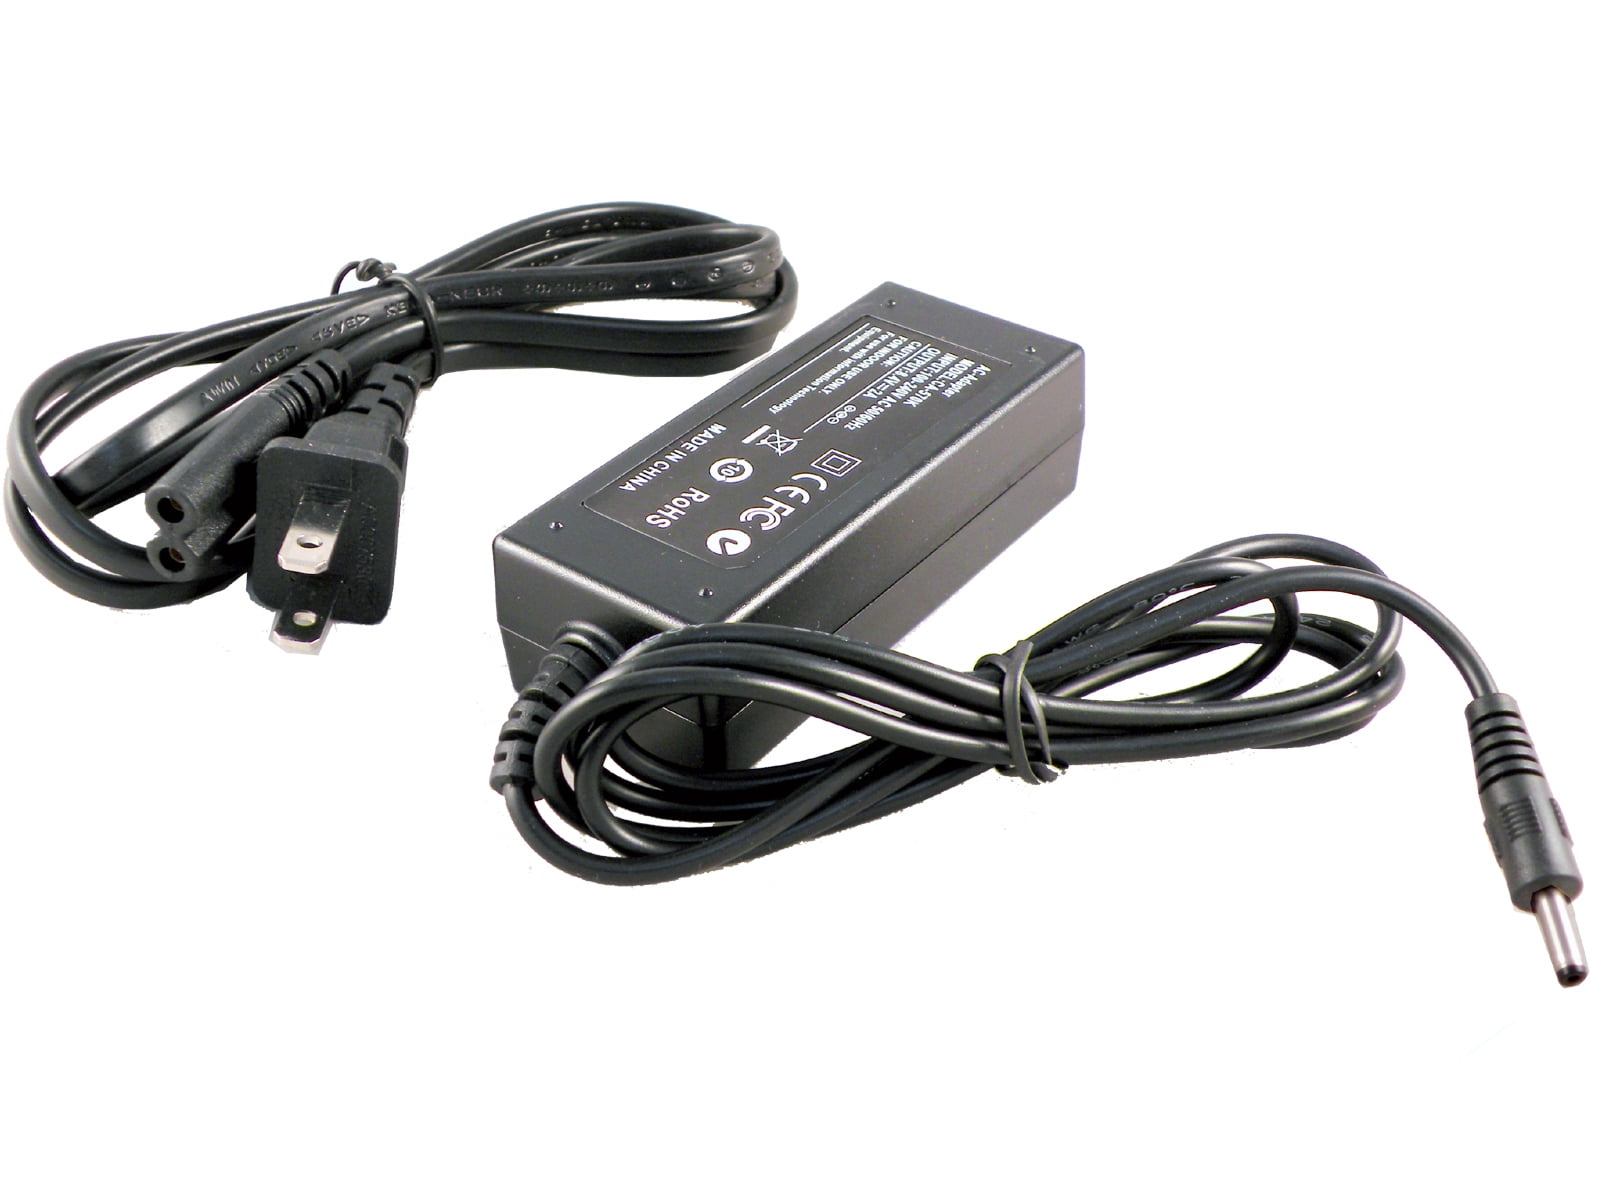 NiceTQ Replacement AC Power Adapter Wall Charger for Canon Camcorder Vixia HF200 HF-M300 